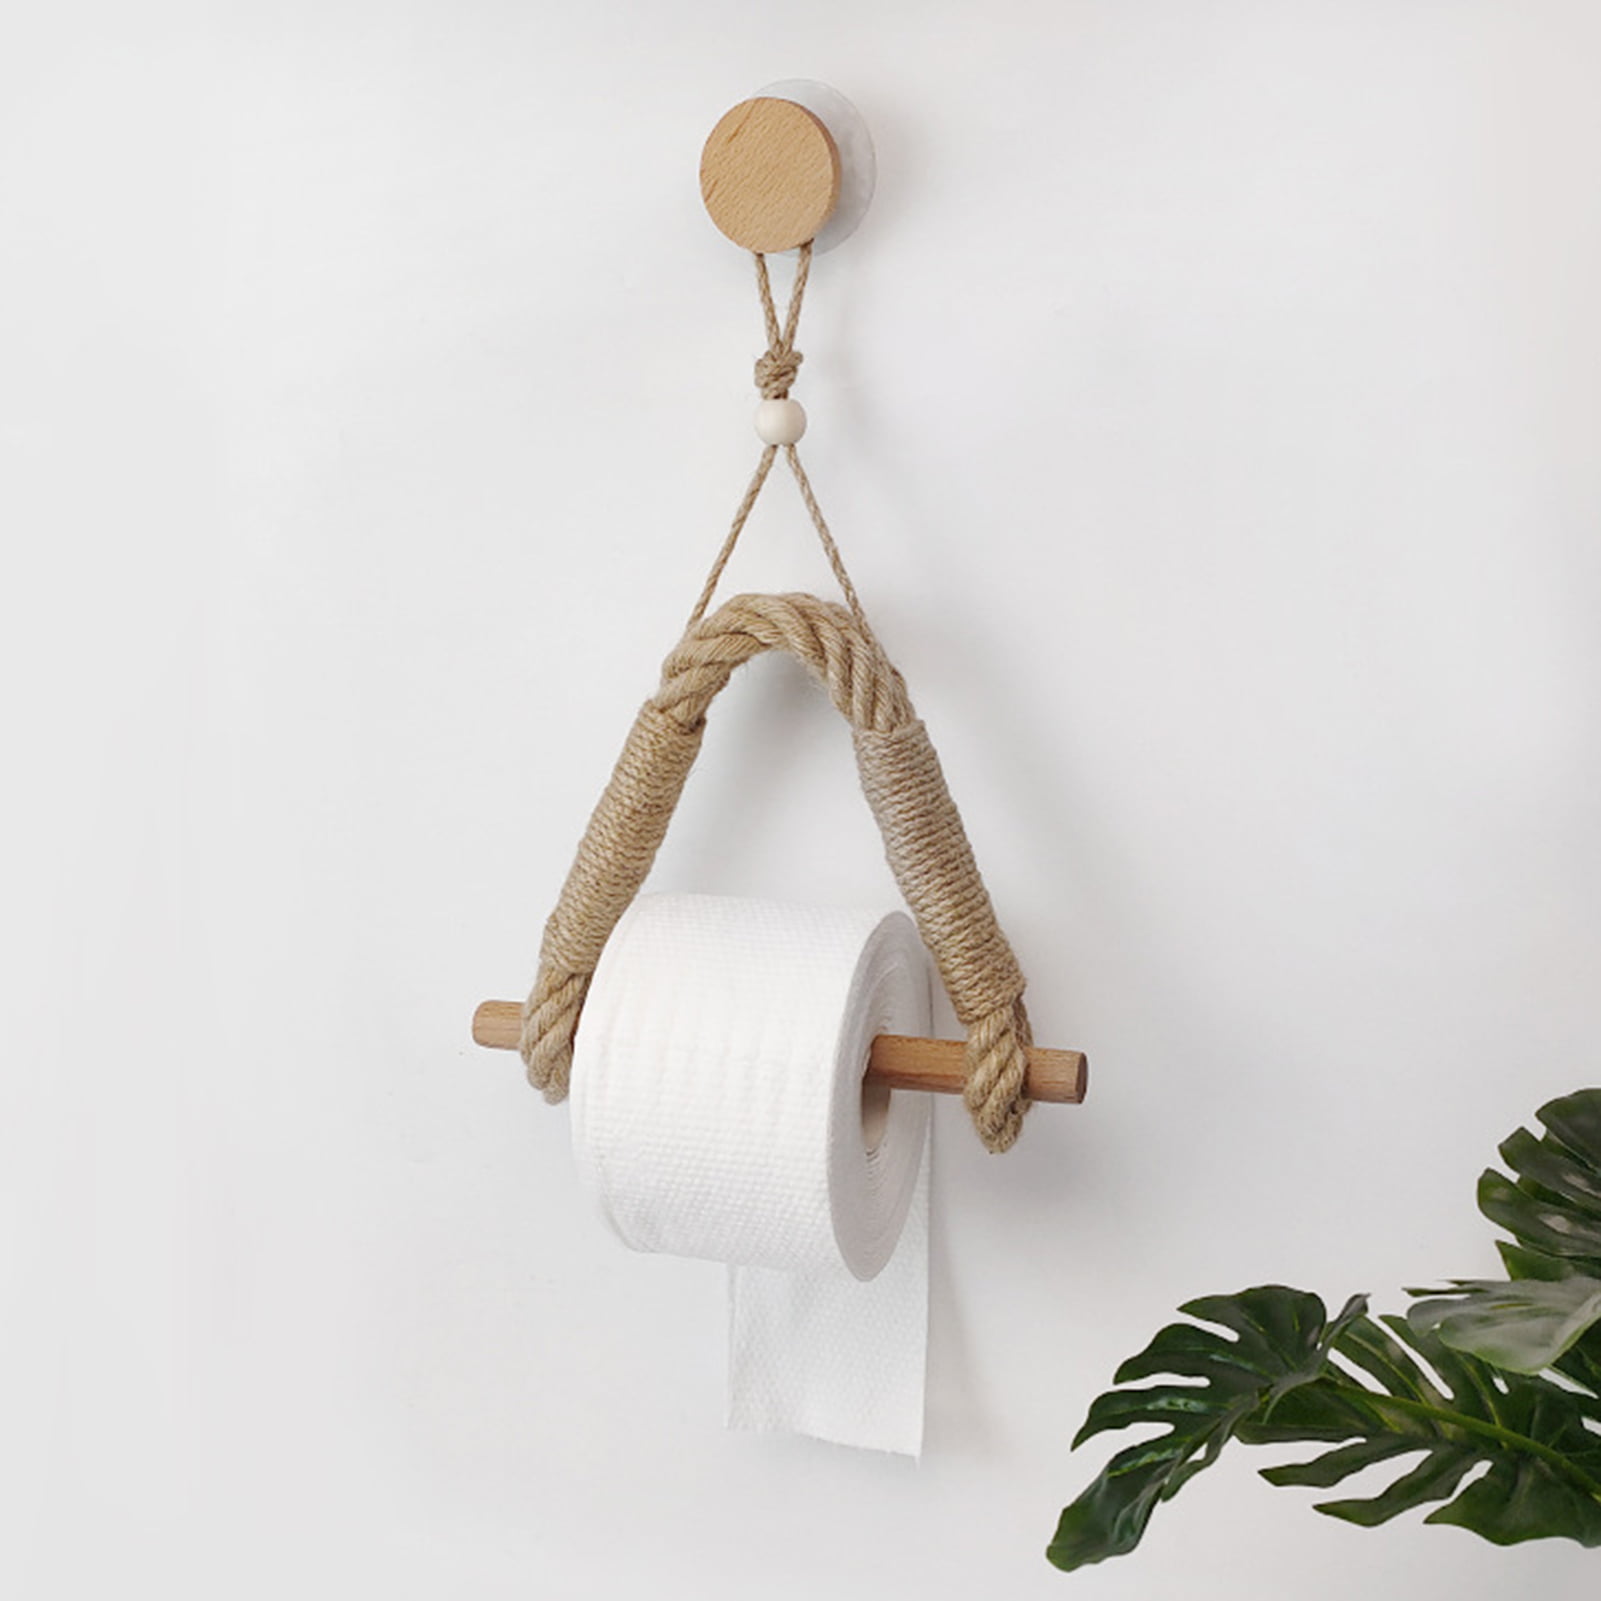 Jute Rope Towel or Toilet Roll Holder Made From Jute,Stainless Steel & Copper 